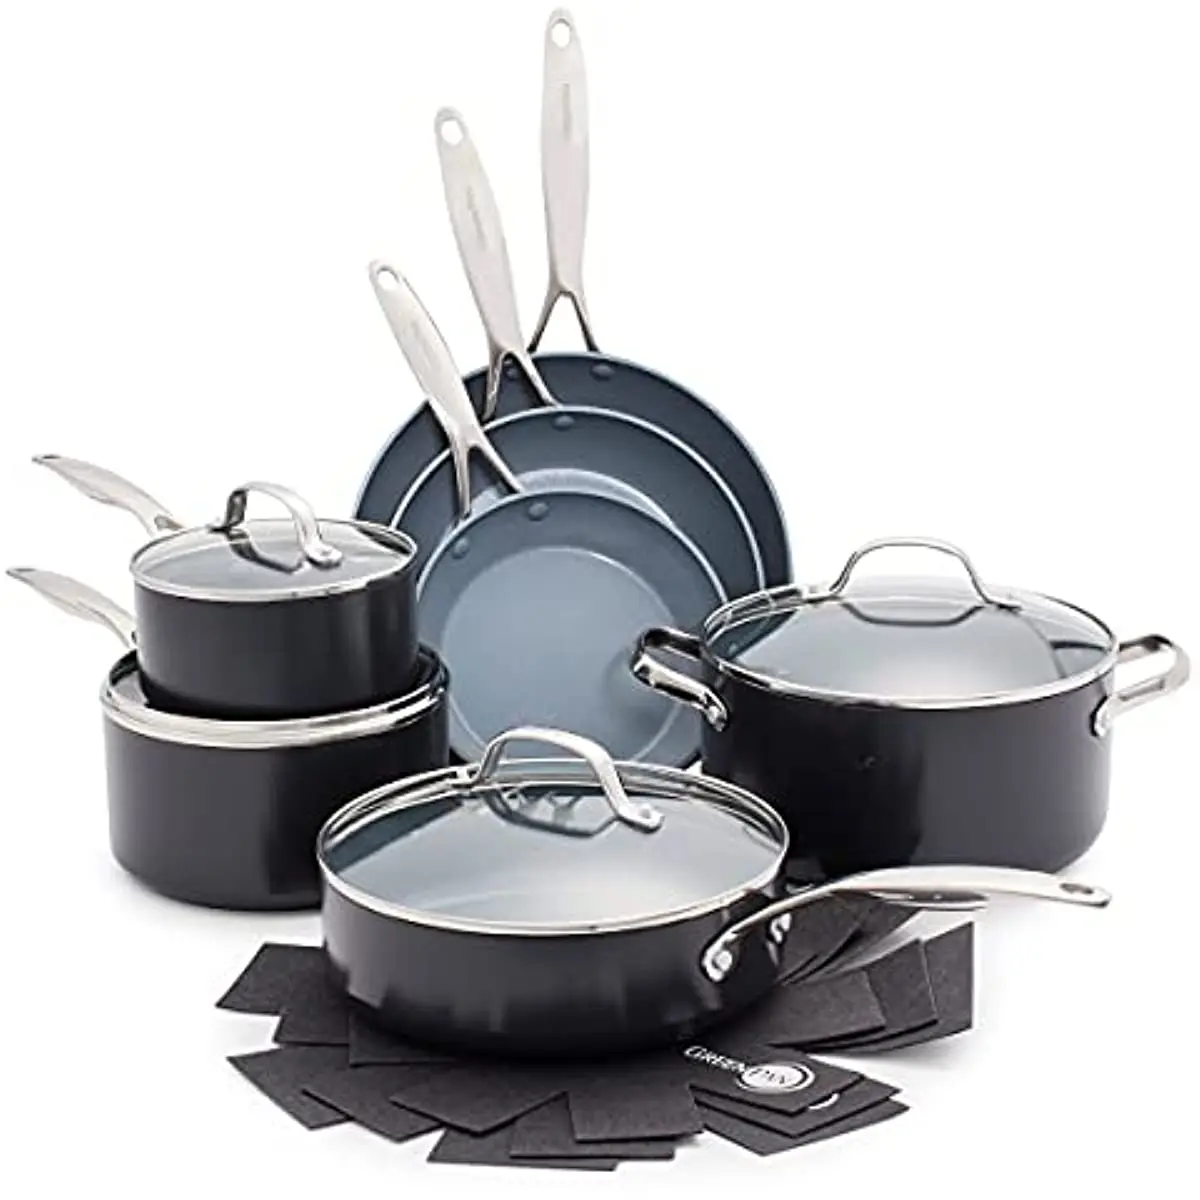 

Valencia Pro Hard Anodized Healthy Ceramic Nonstick 11 Piece Cookware Pots and Pans Set, PFAS-Free, Induction, Dishwasher Safe,